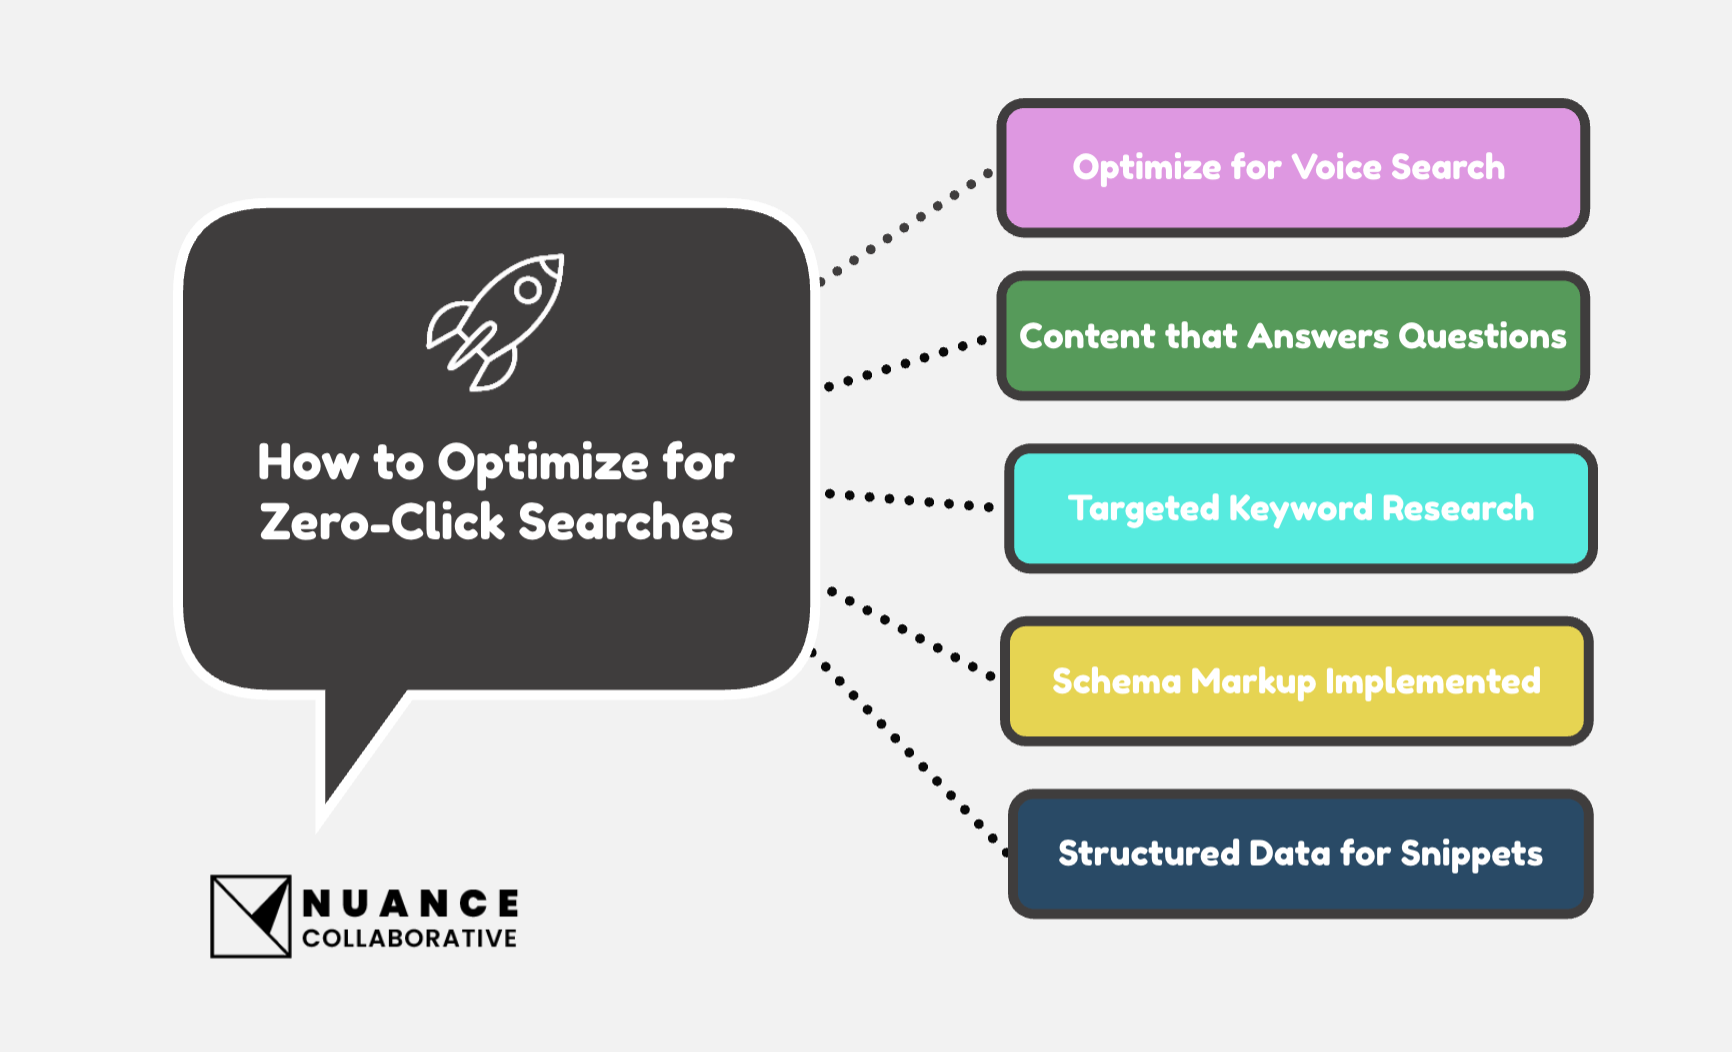 A diagram showing how to optimize for zero-click searches.